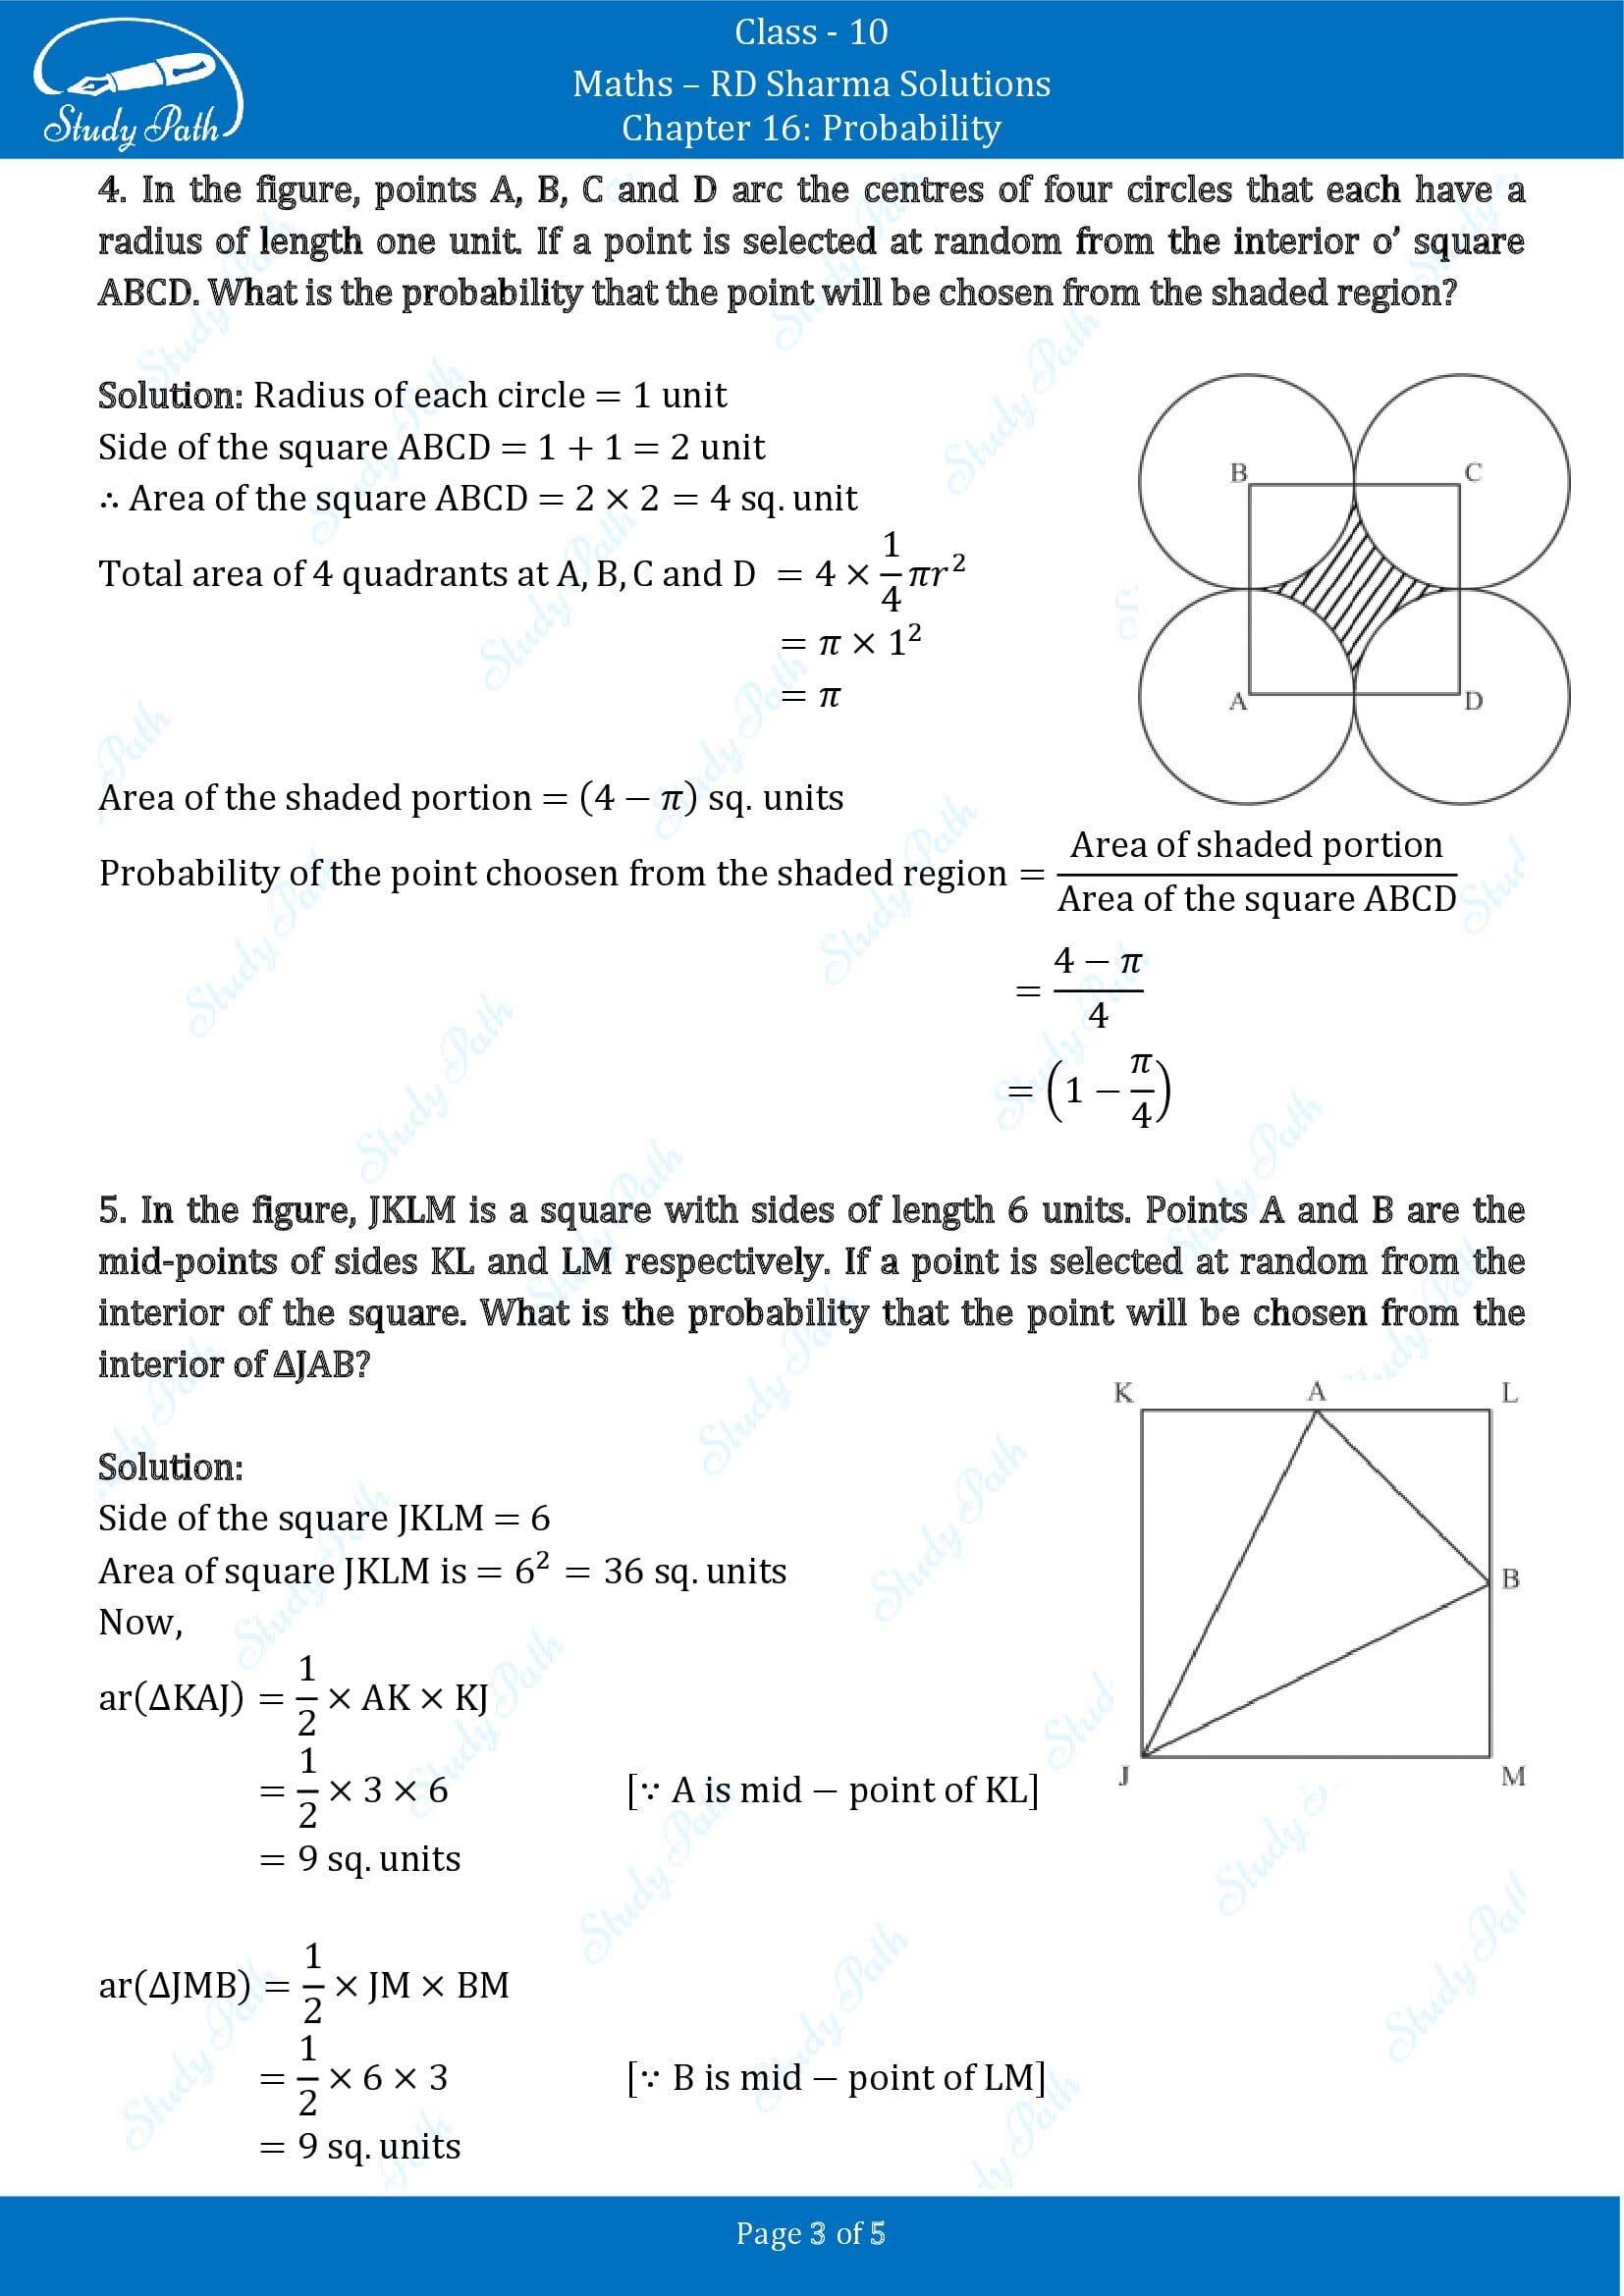 RD Sharma Solutions Class 10 Chapter 16 Probability Exercise 16.2 00003